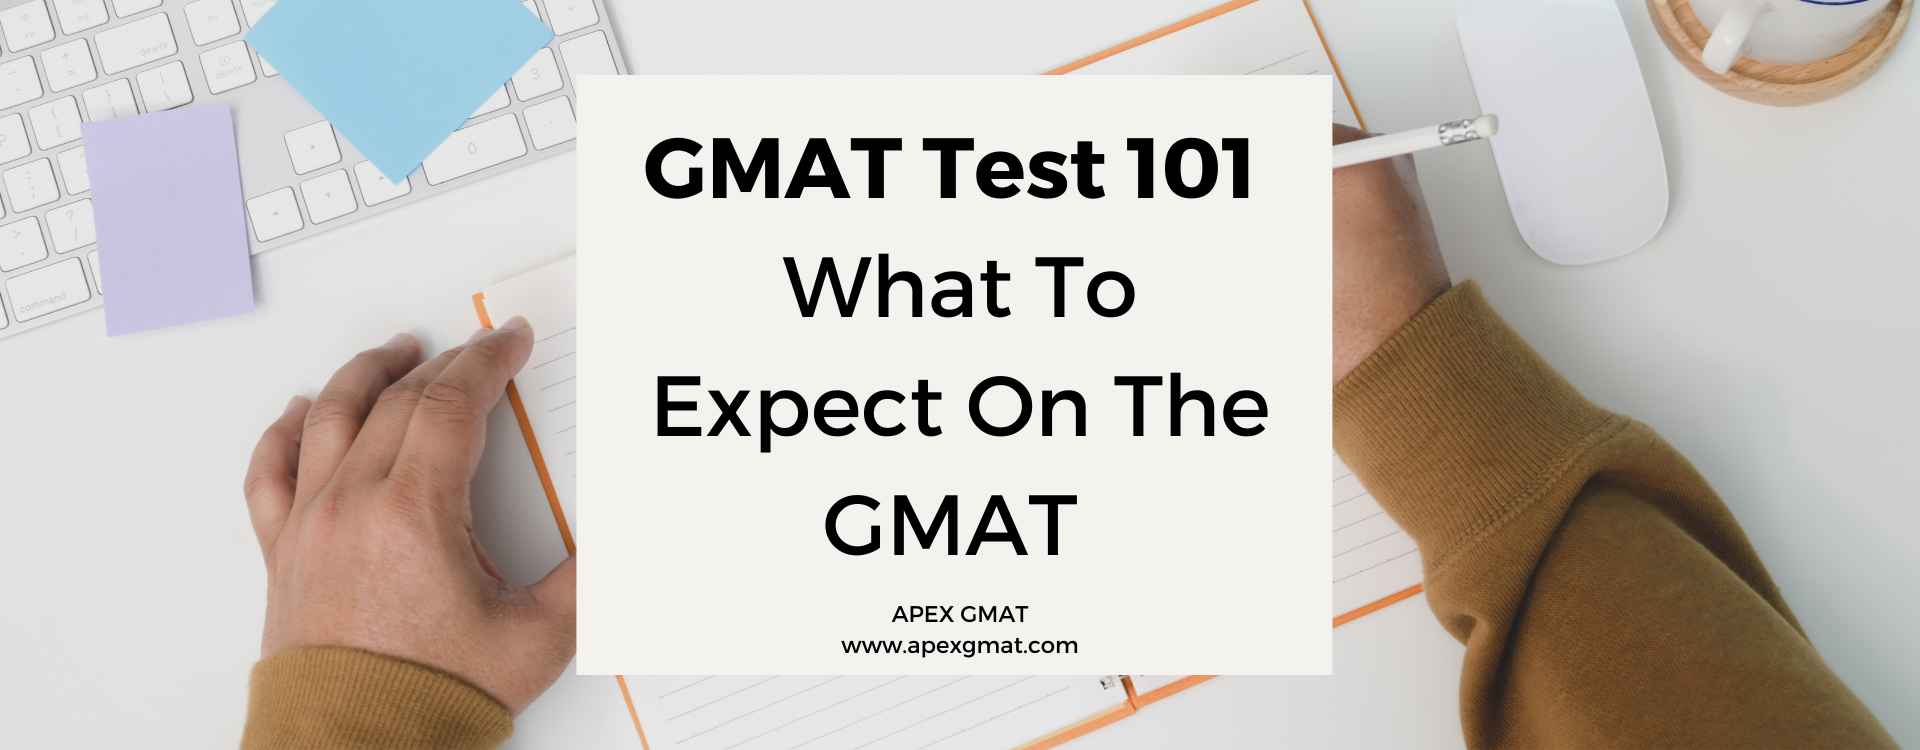 GMAT Test 101 What To Expect On The GMAT